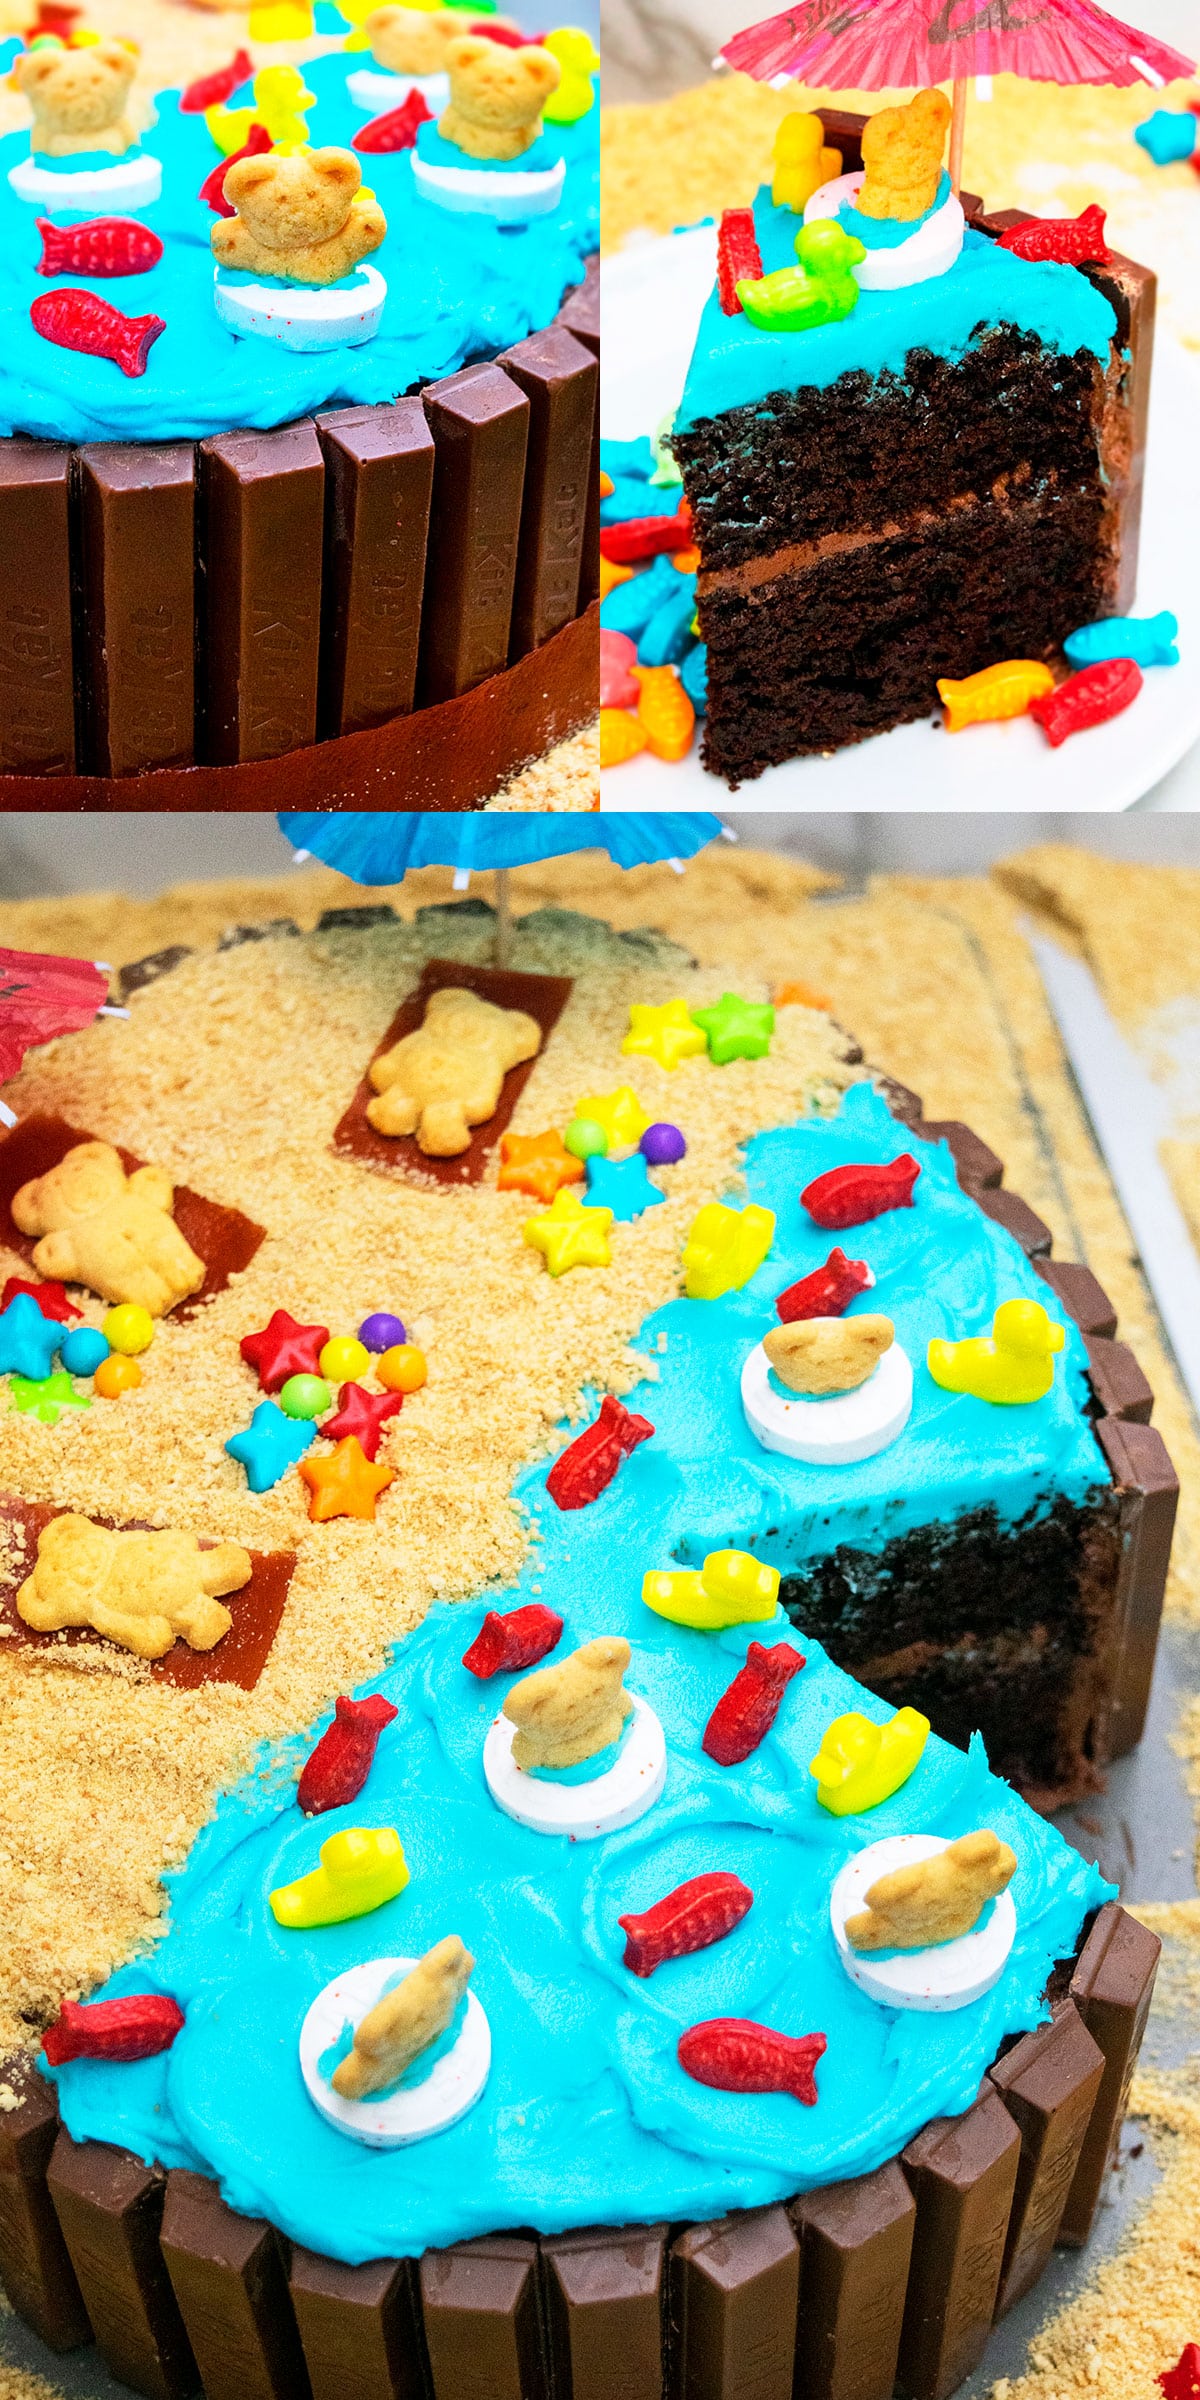 Collage Image With Decorated Birthday Cake Details.